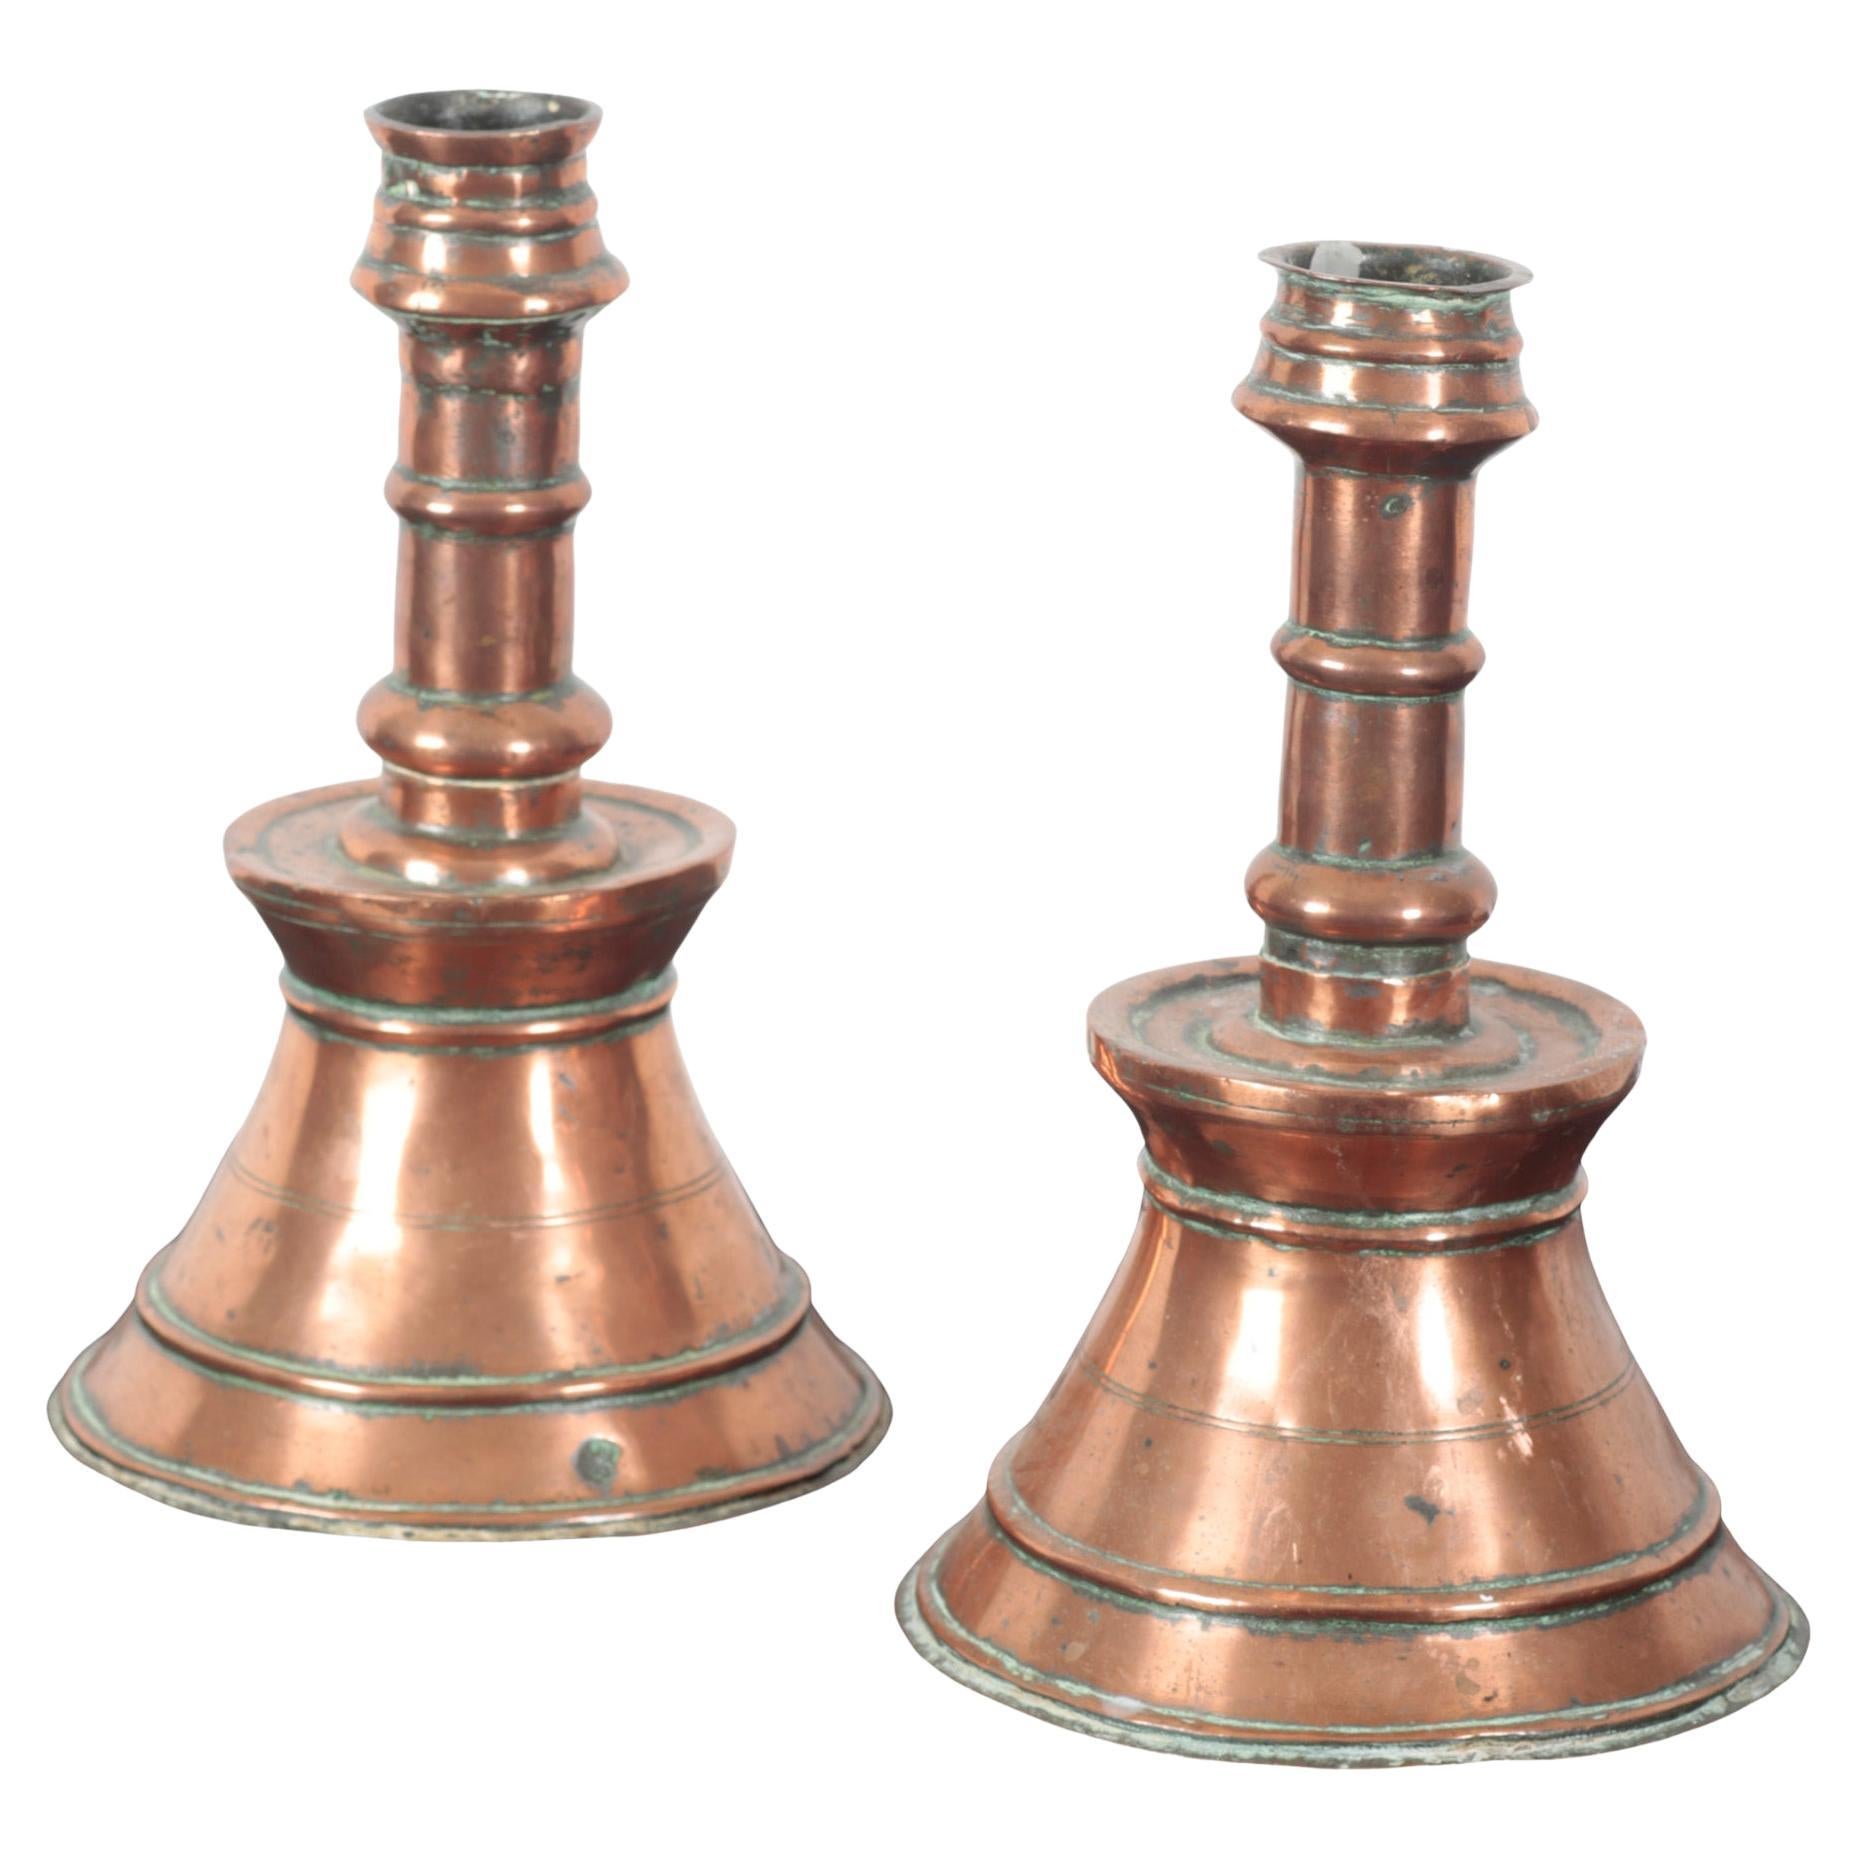 Pair of 19th Century Ottoman Copper Candlesticks